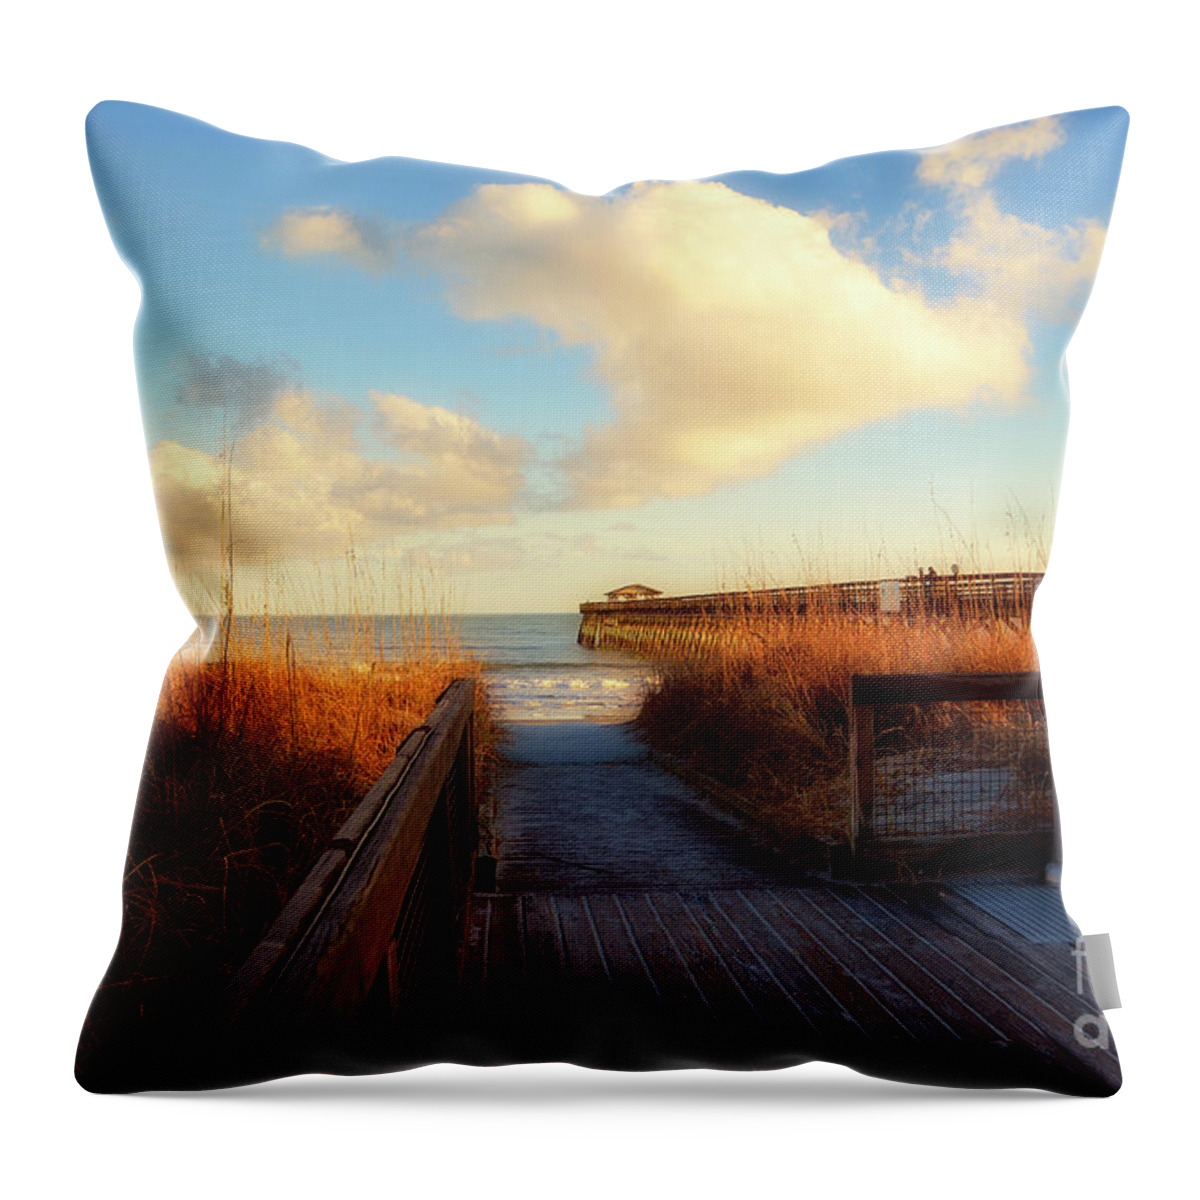 Scenic Throw Pillow featuring the photograph Myrtle Beach State Park Pier by Kathy Baccari